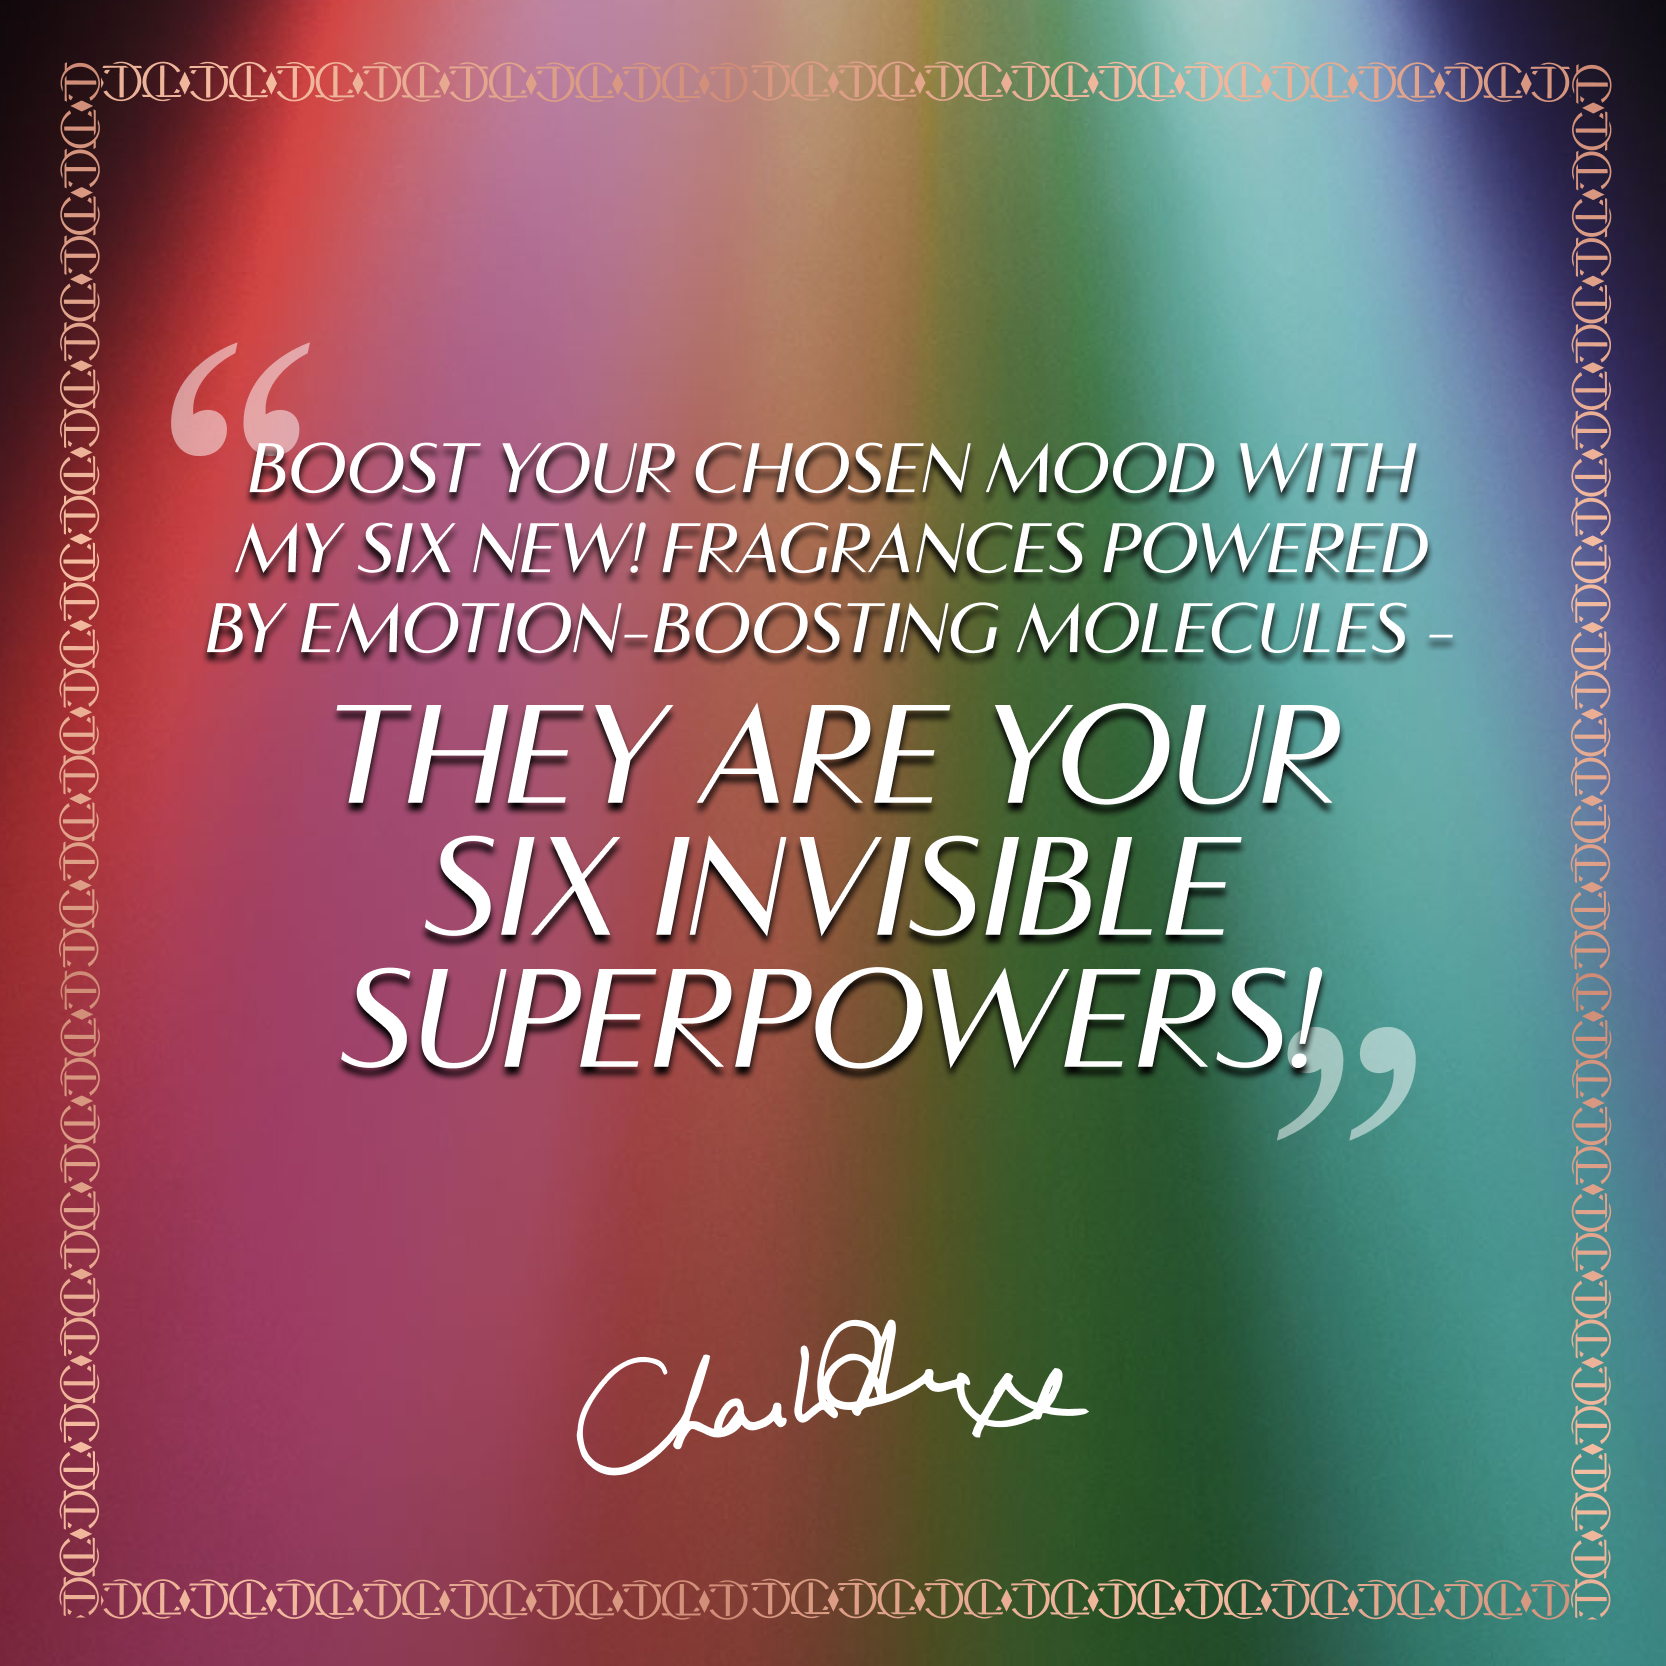 Charlotte Quote - Superpowers